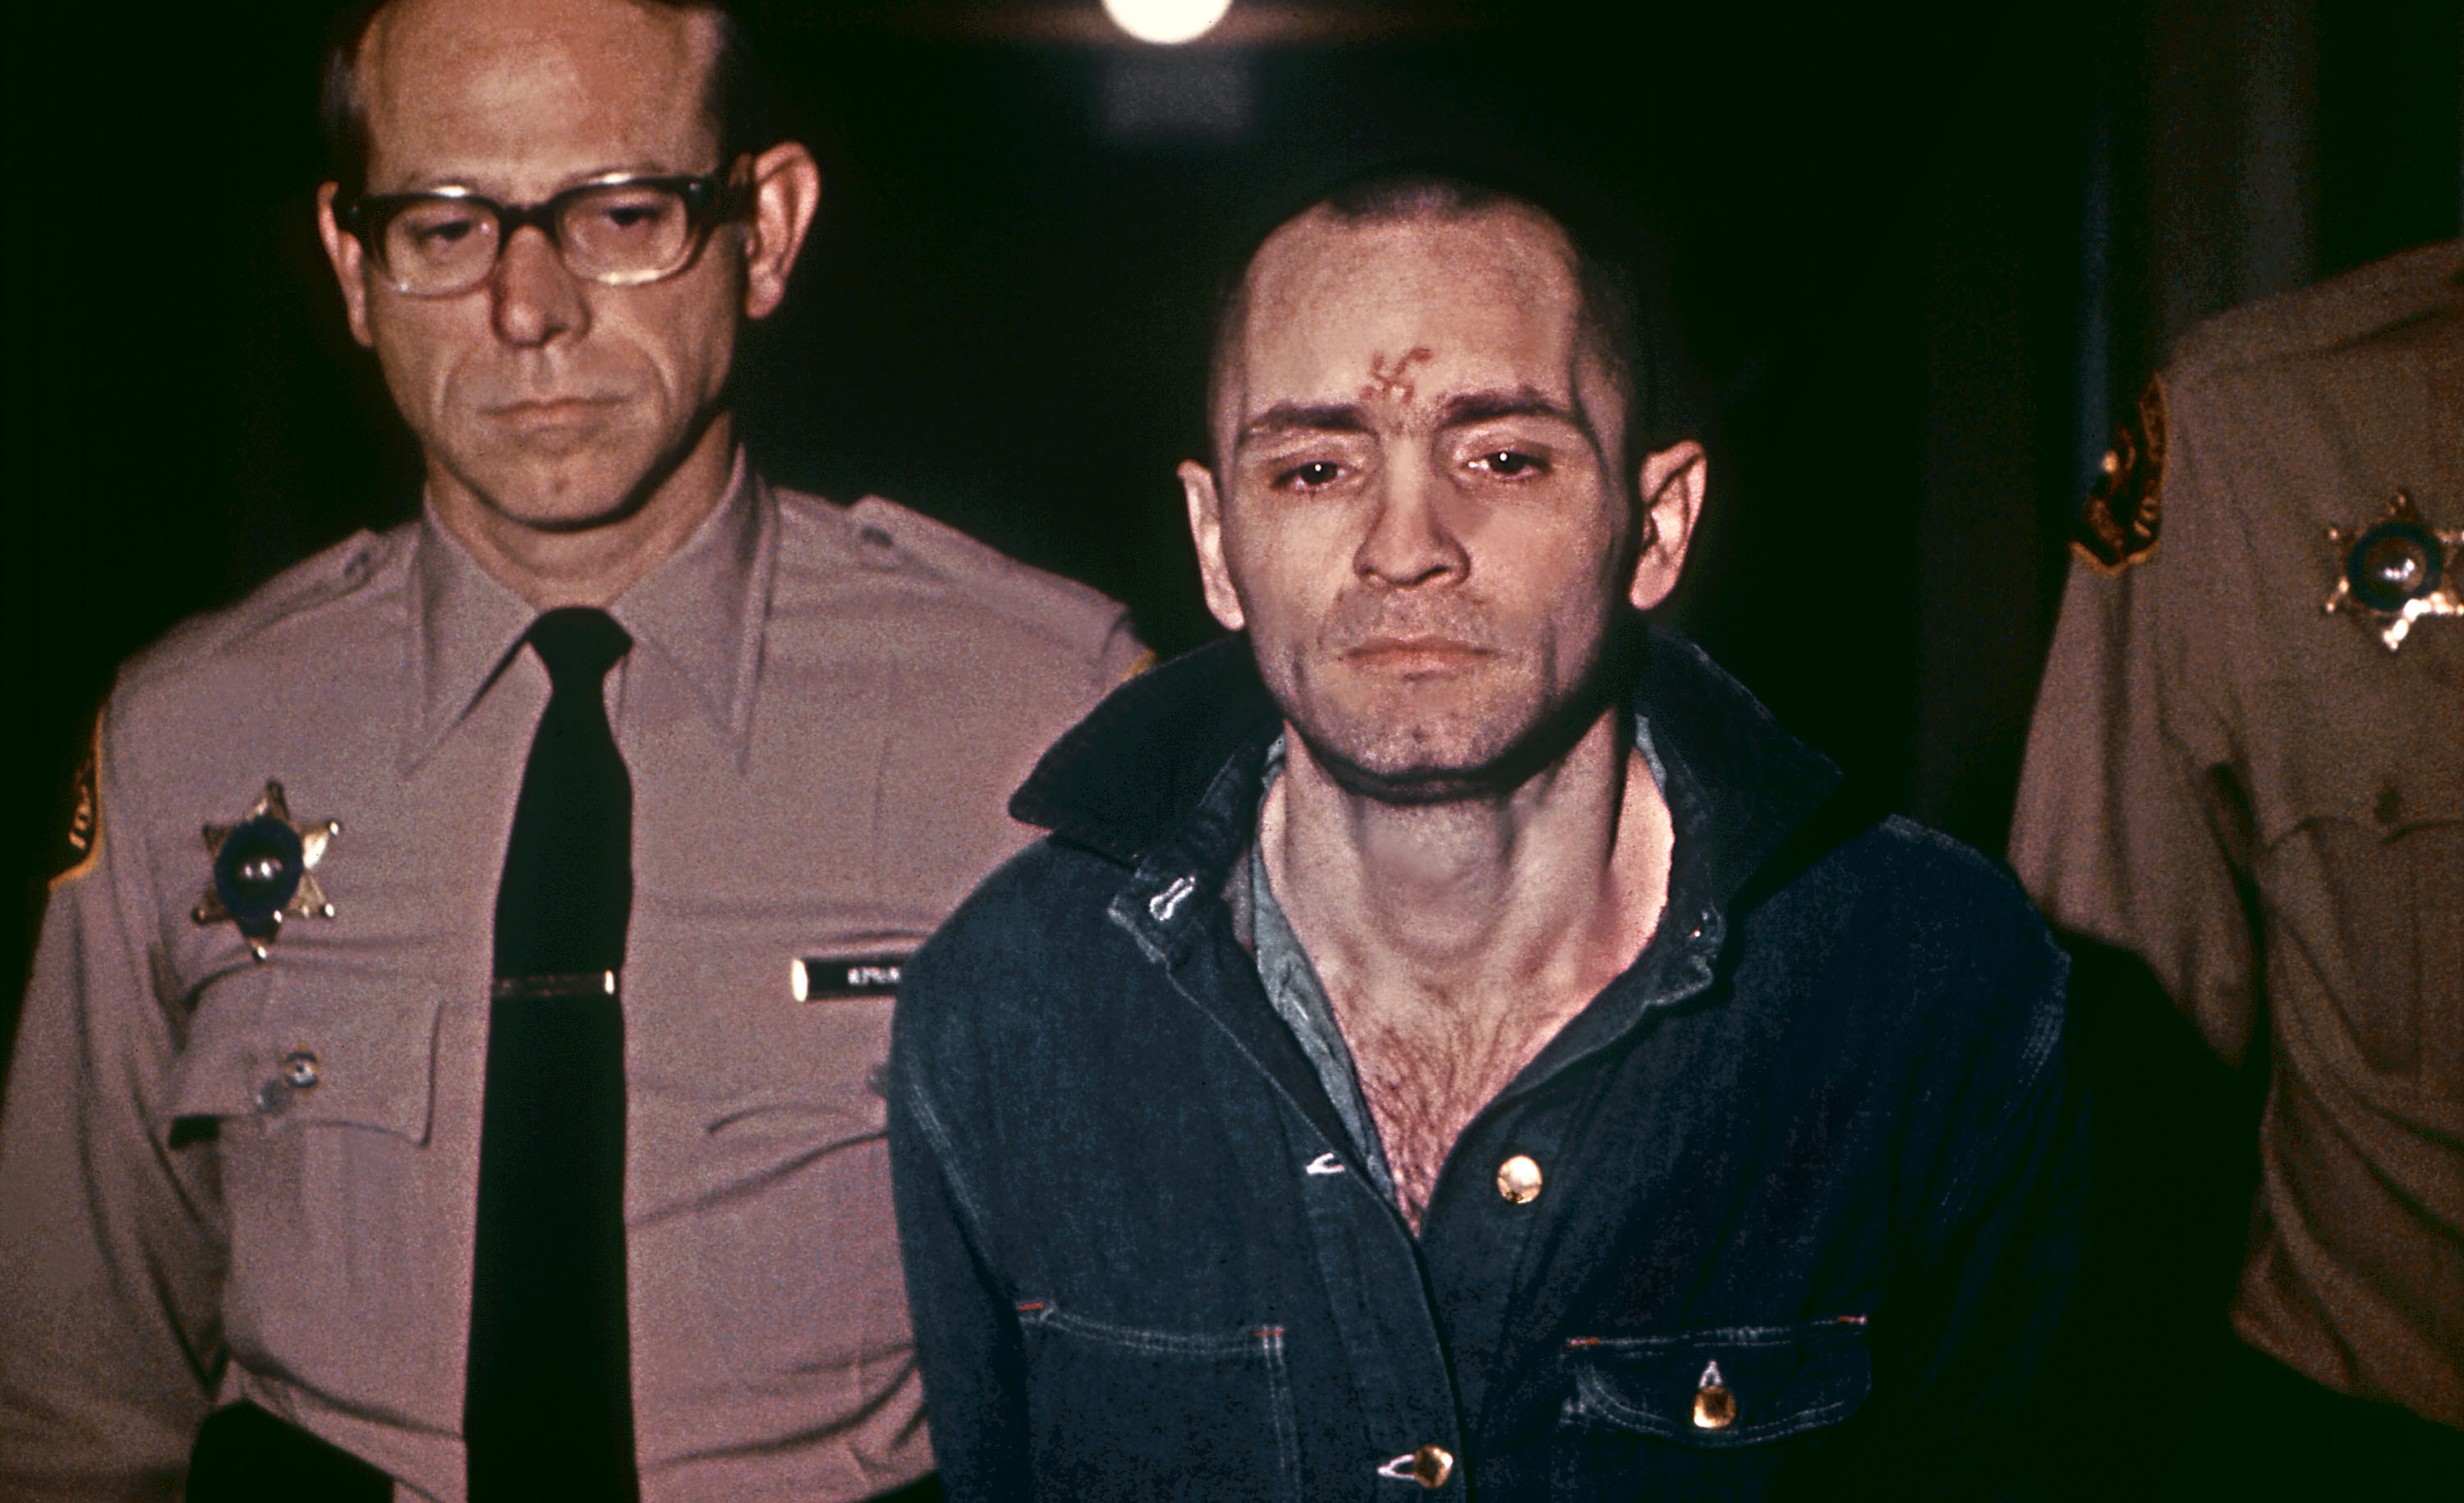 Surprising Facts About 7 Famous Murderers Will Leave You Both Stunned And Scared